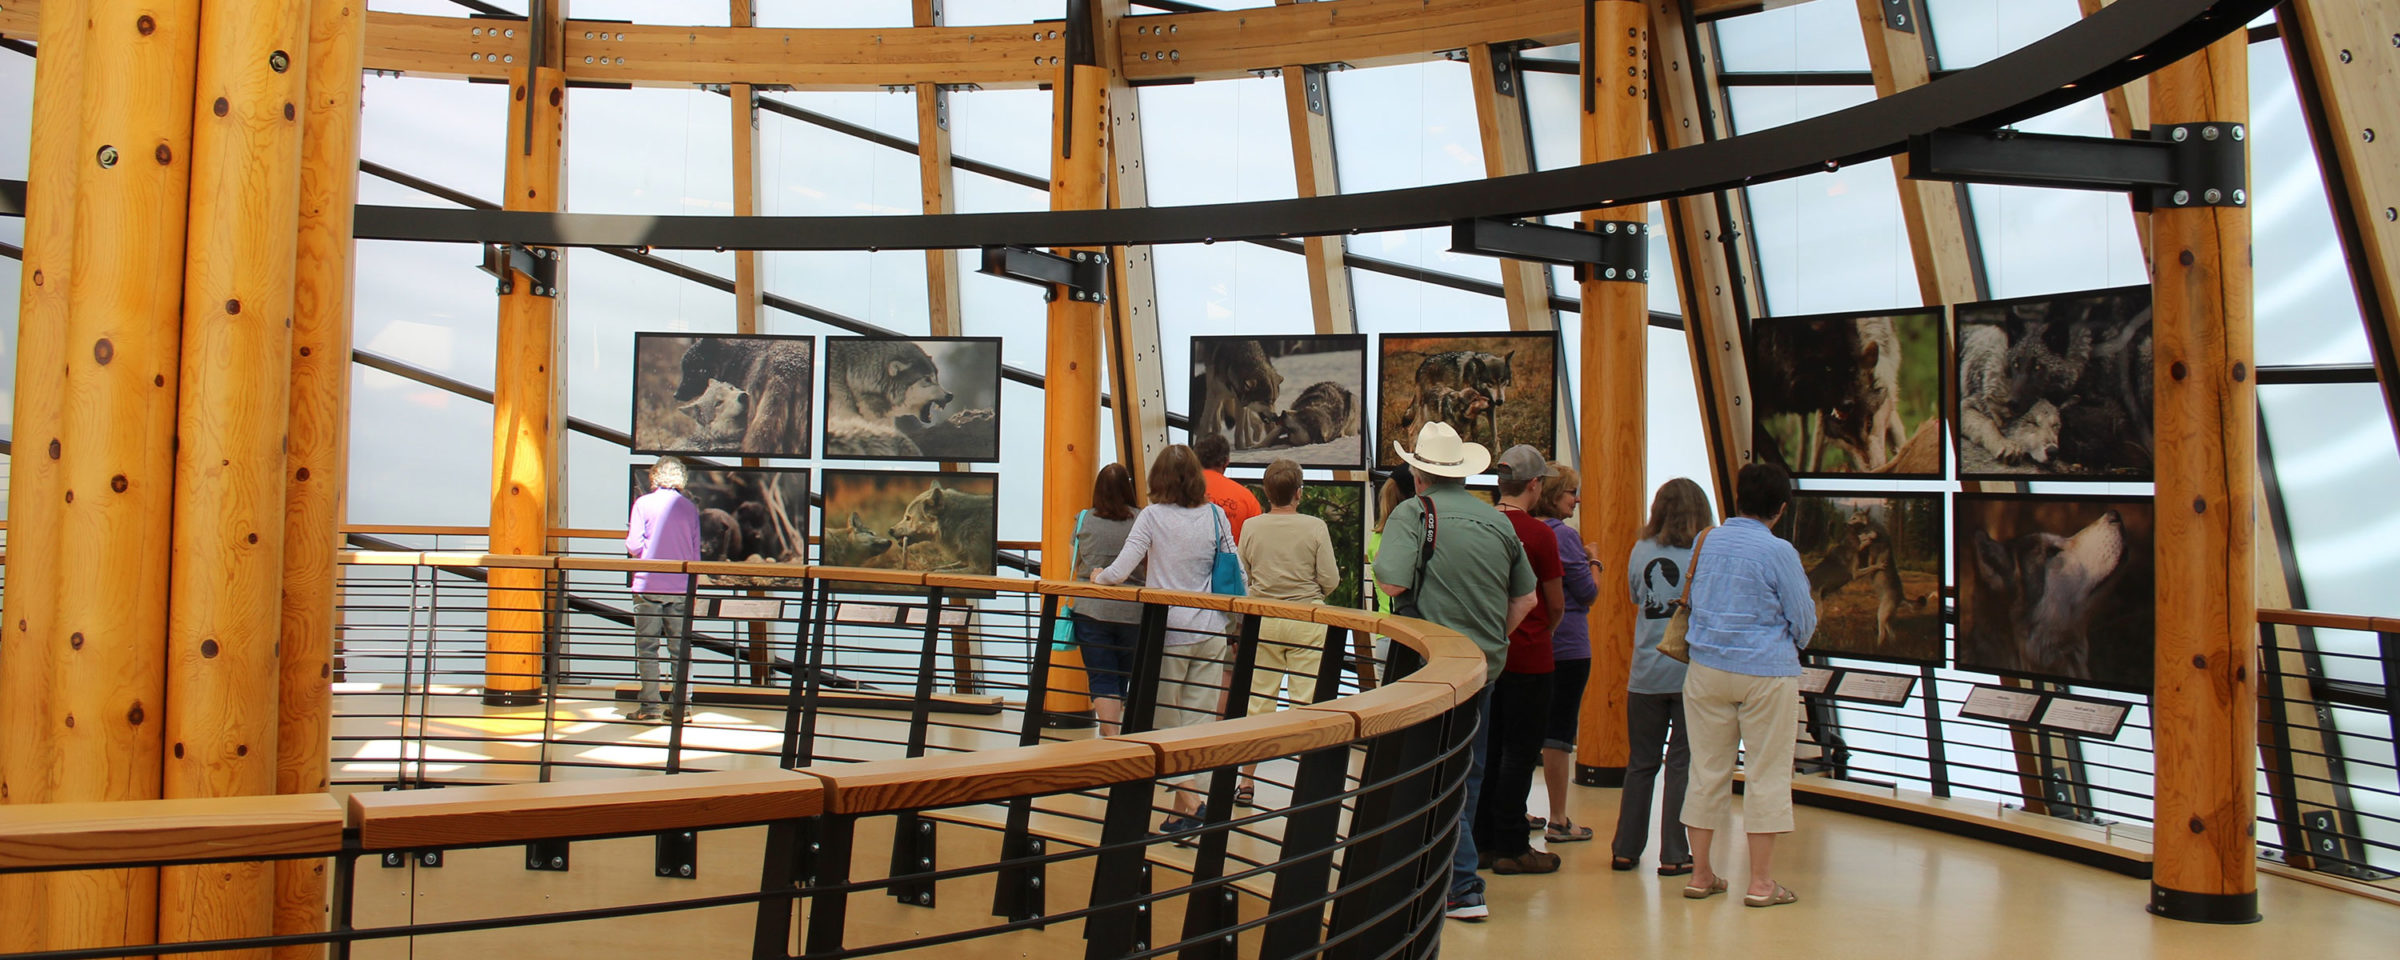 image of museum wolves exhibit